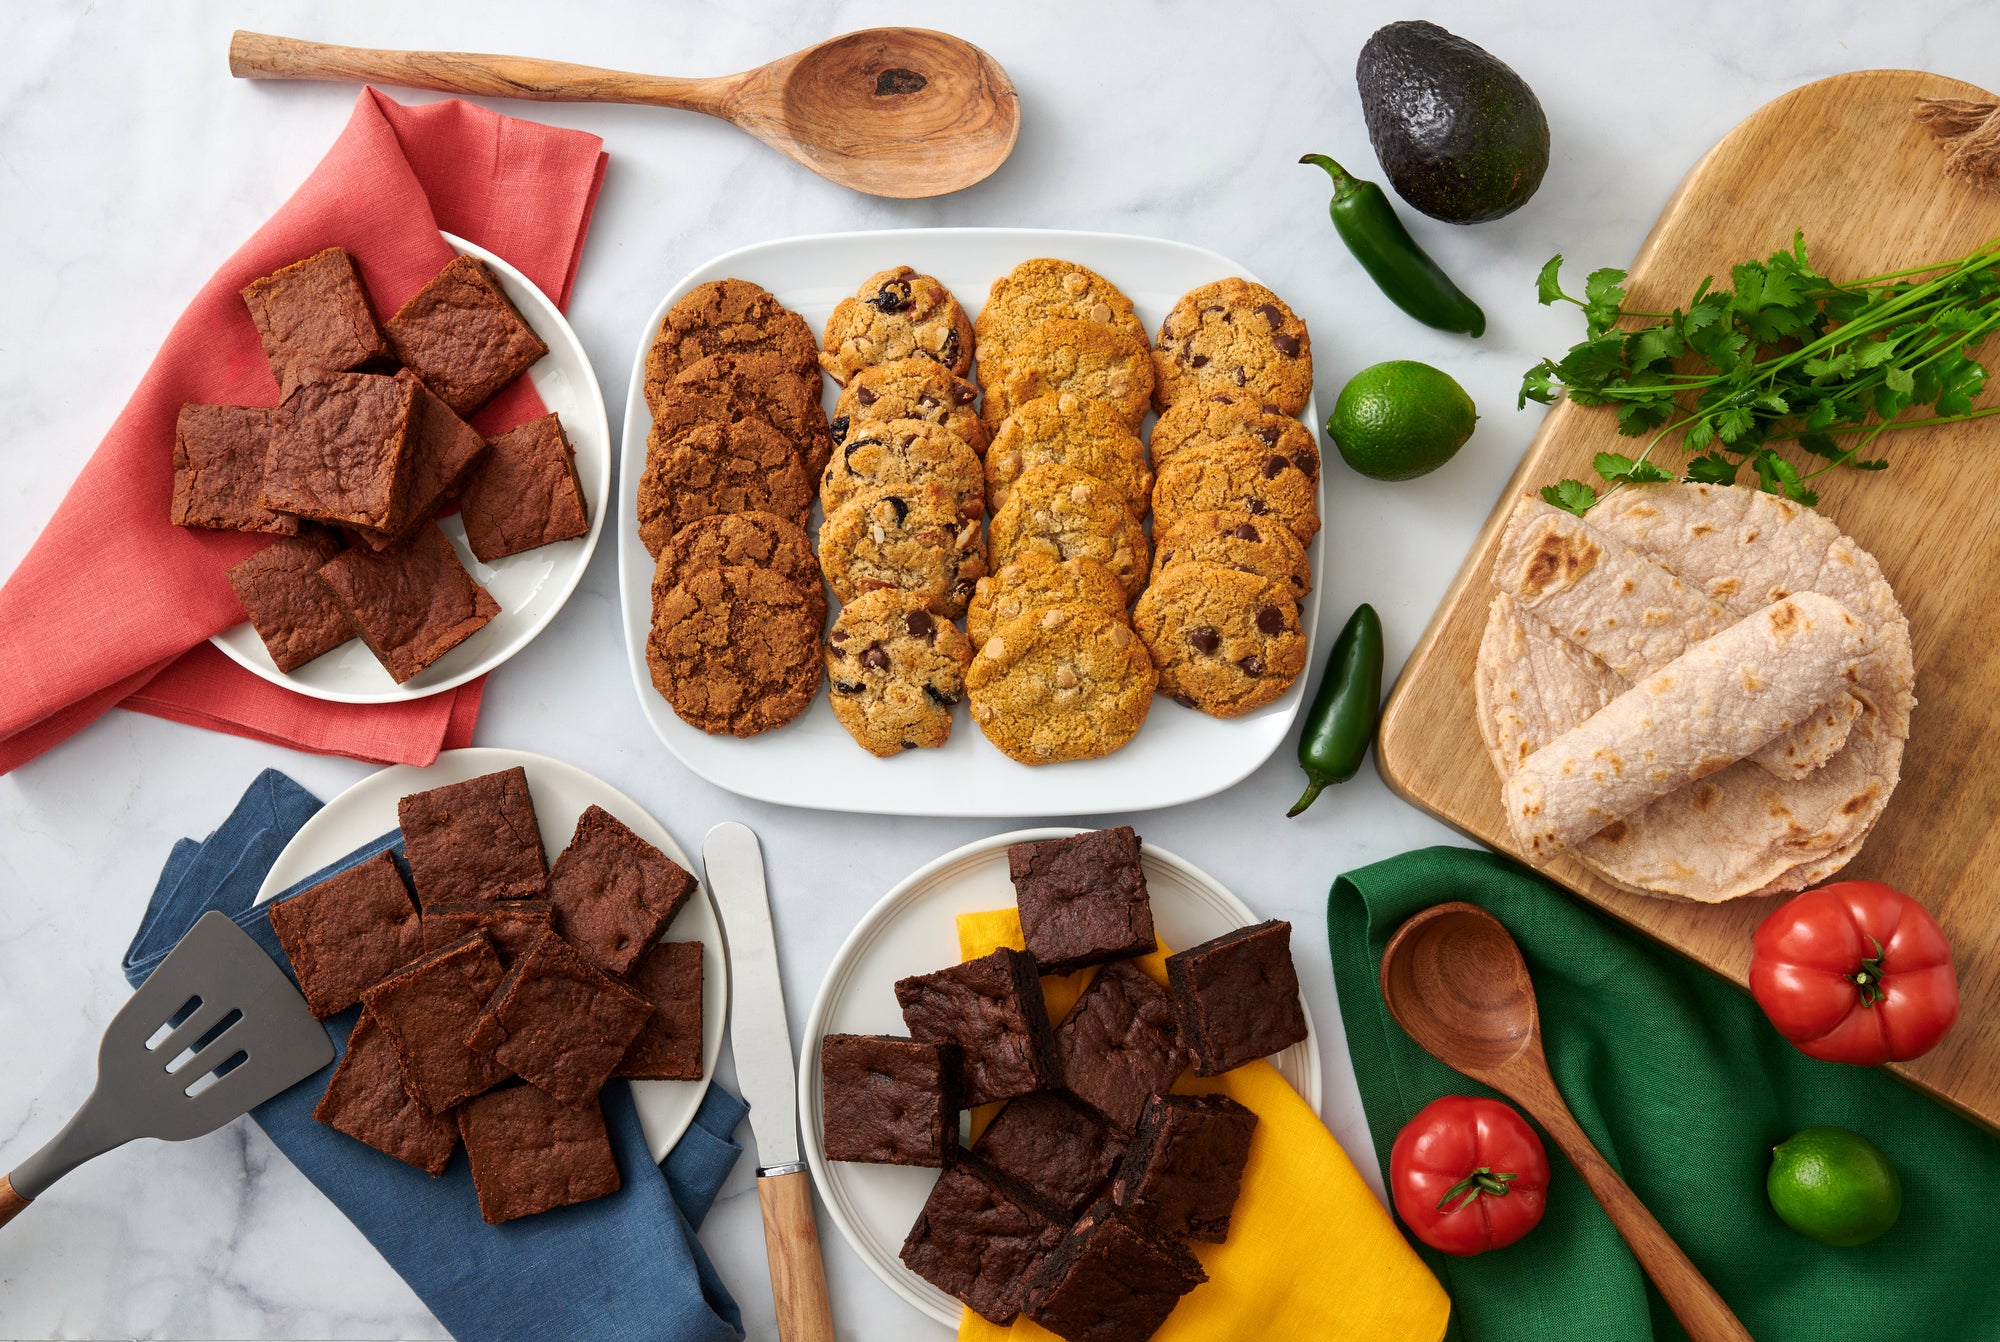 A decorated table with 3 piles of different flavors of brownies on 3 plates, a rectangle plate with rows of 4 kinds of cookies, and some tortillas on a wooden cutting board with a spoon, cilantro, limes, jalapeño, cilantro and tomatoes around them. 